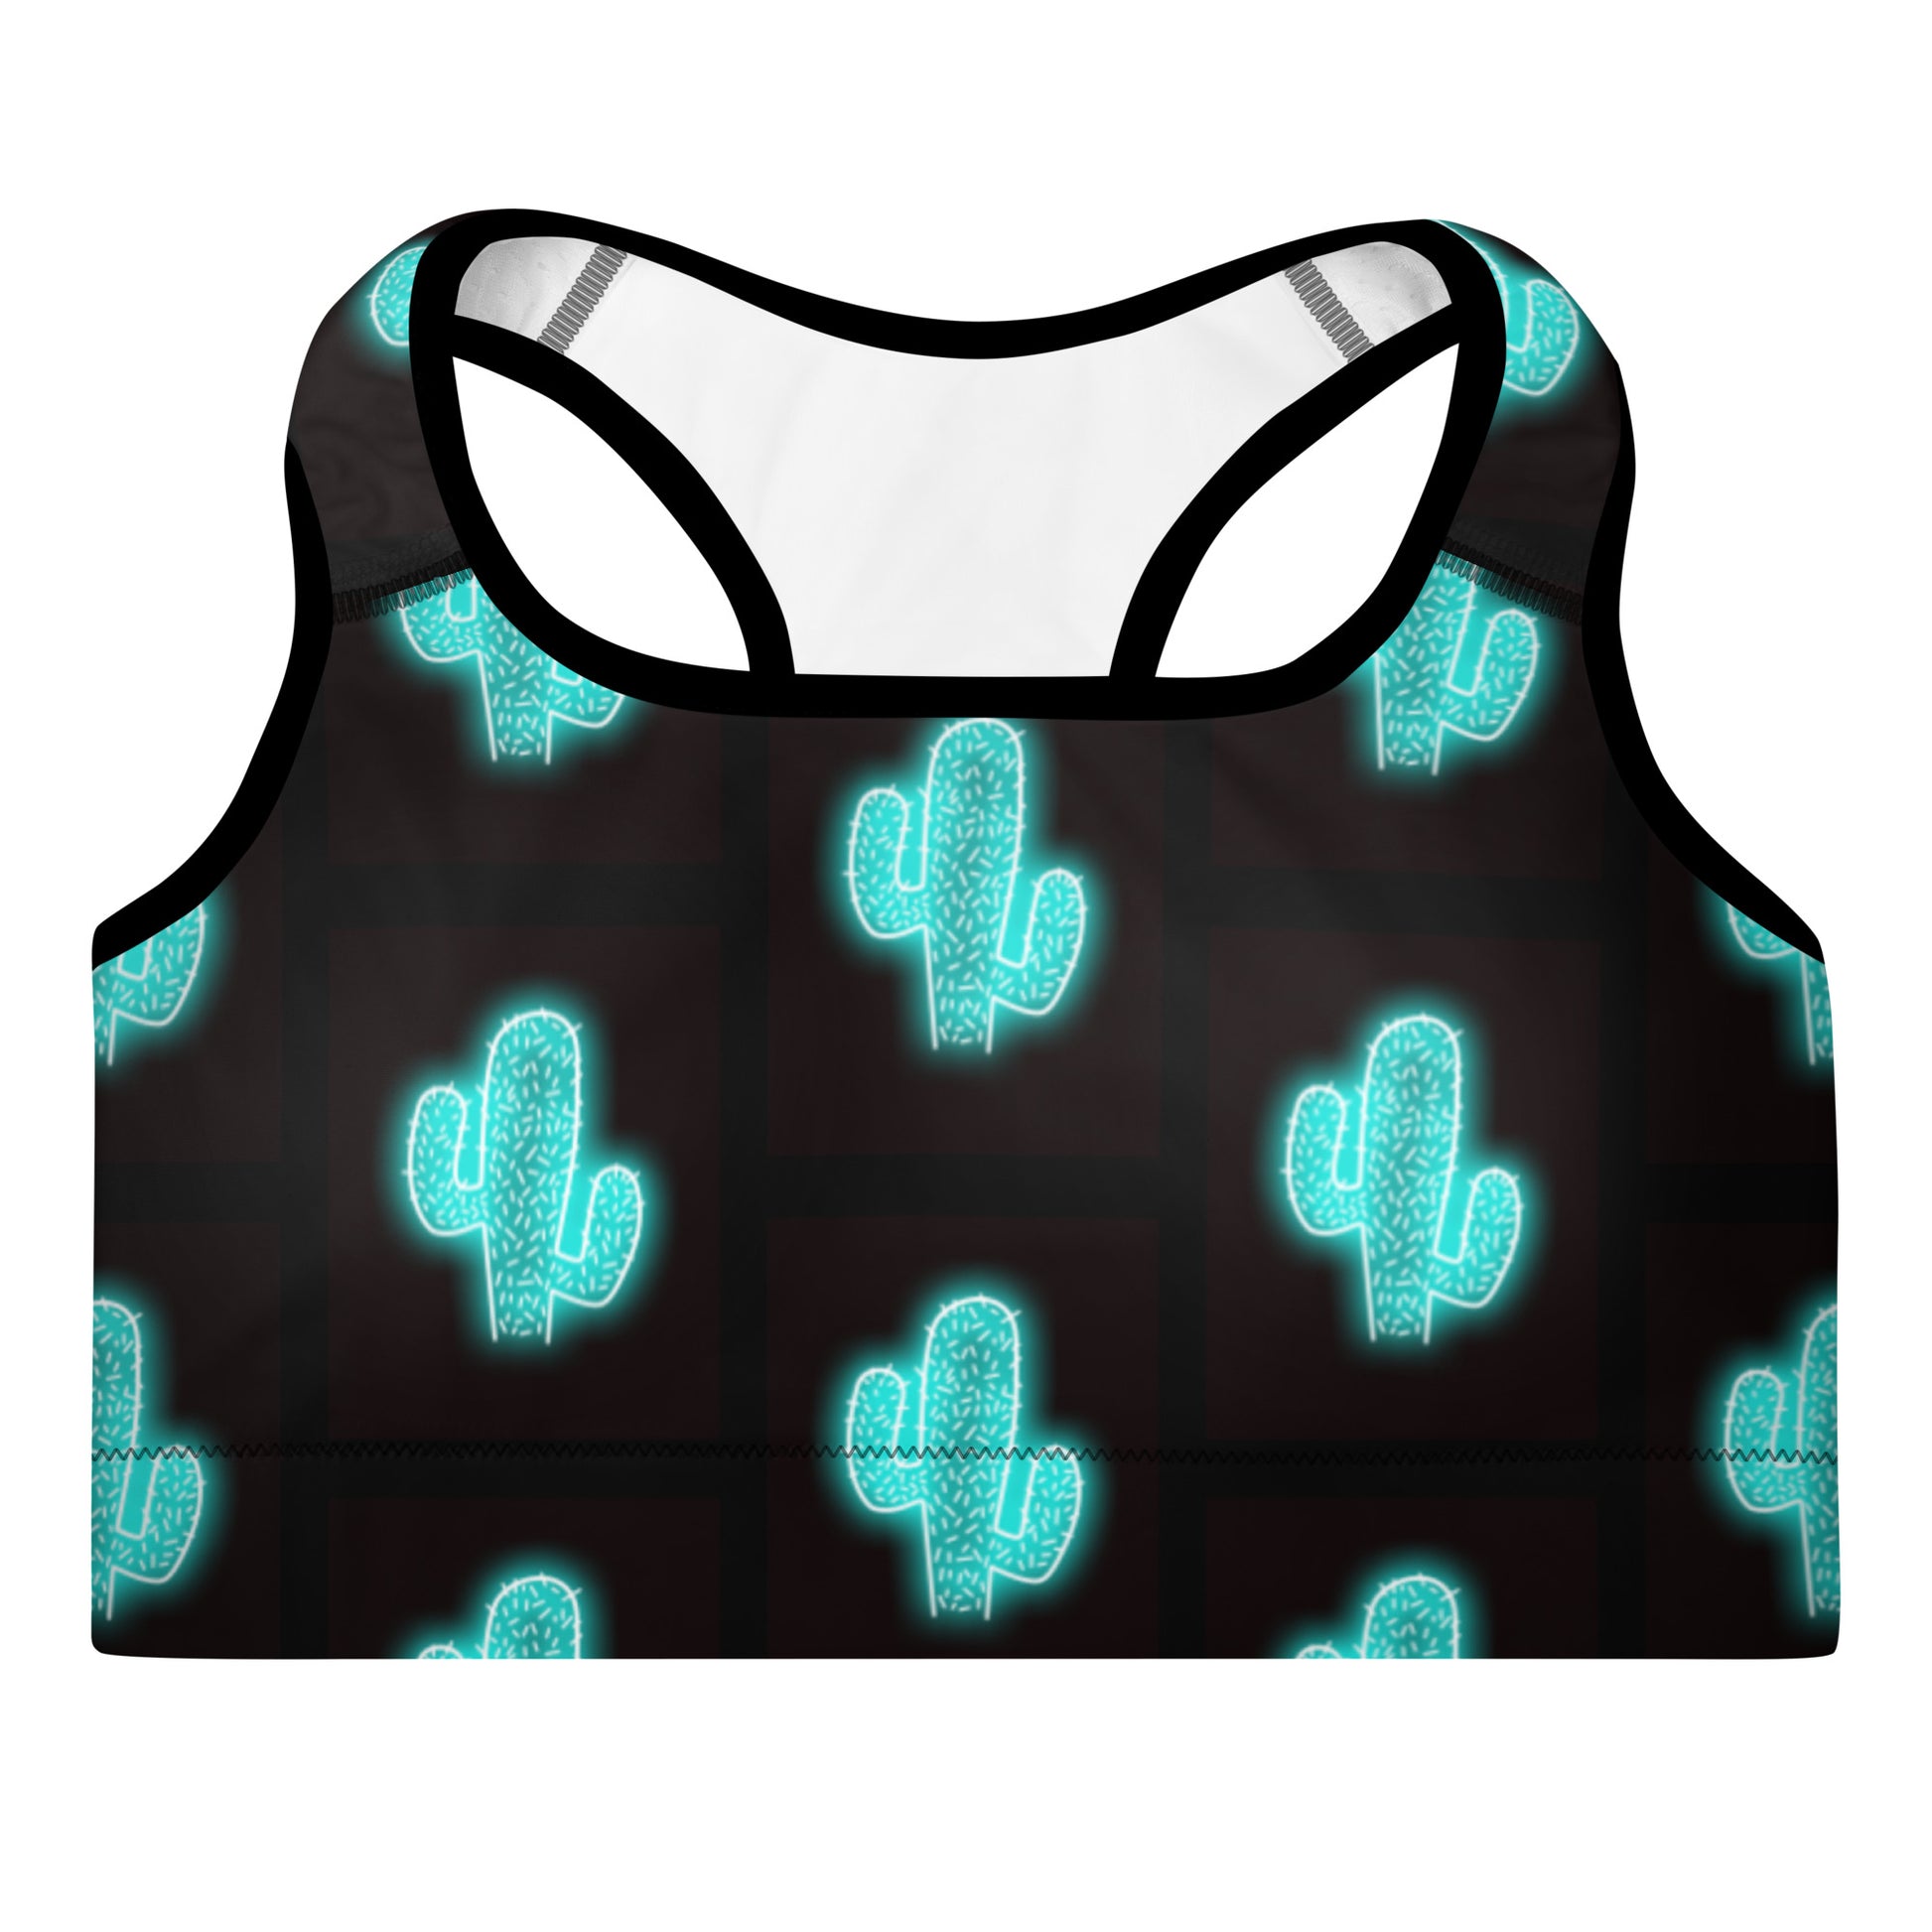 Turquoise Neon Cactus Padded Sports Bra - bra, cactus print, neon, padded, padded bra, sports bra, turquoise, turquoise neon, work out -  - Baha Ranch Western Wear